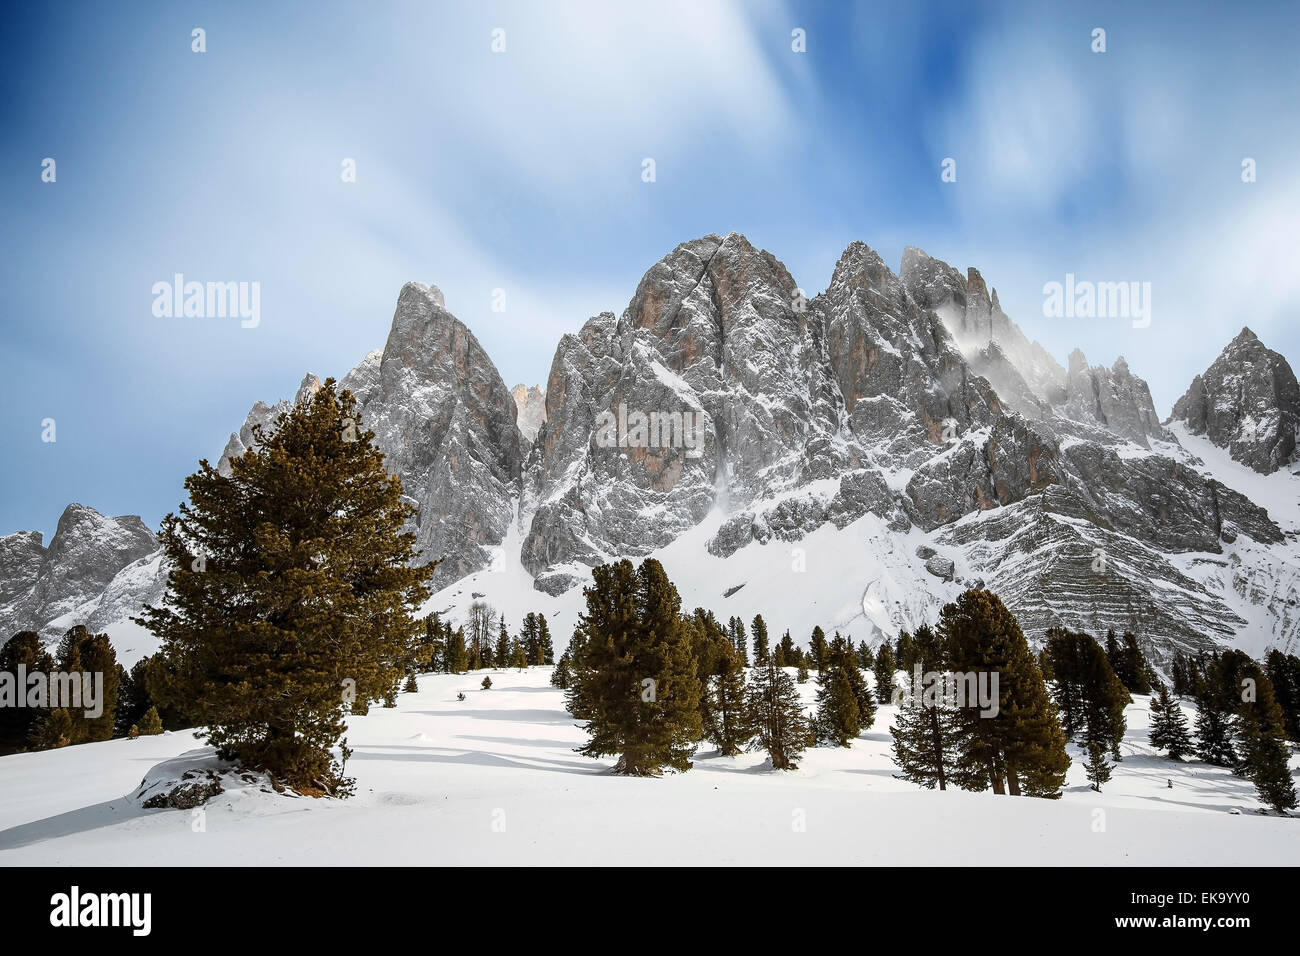 The Odle massif in winter season. Sass Rigais and Furchetta peaks. Pinus cembra forest. The Dolomites of Funes valley. Italian Alps. Europe. Stock Photo